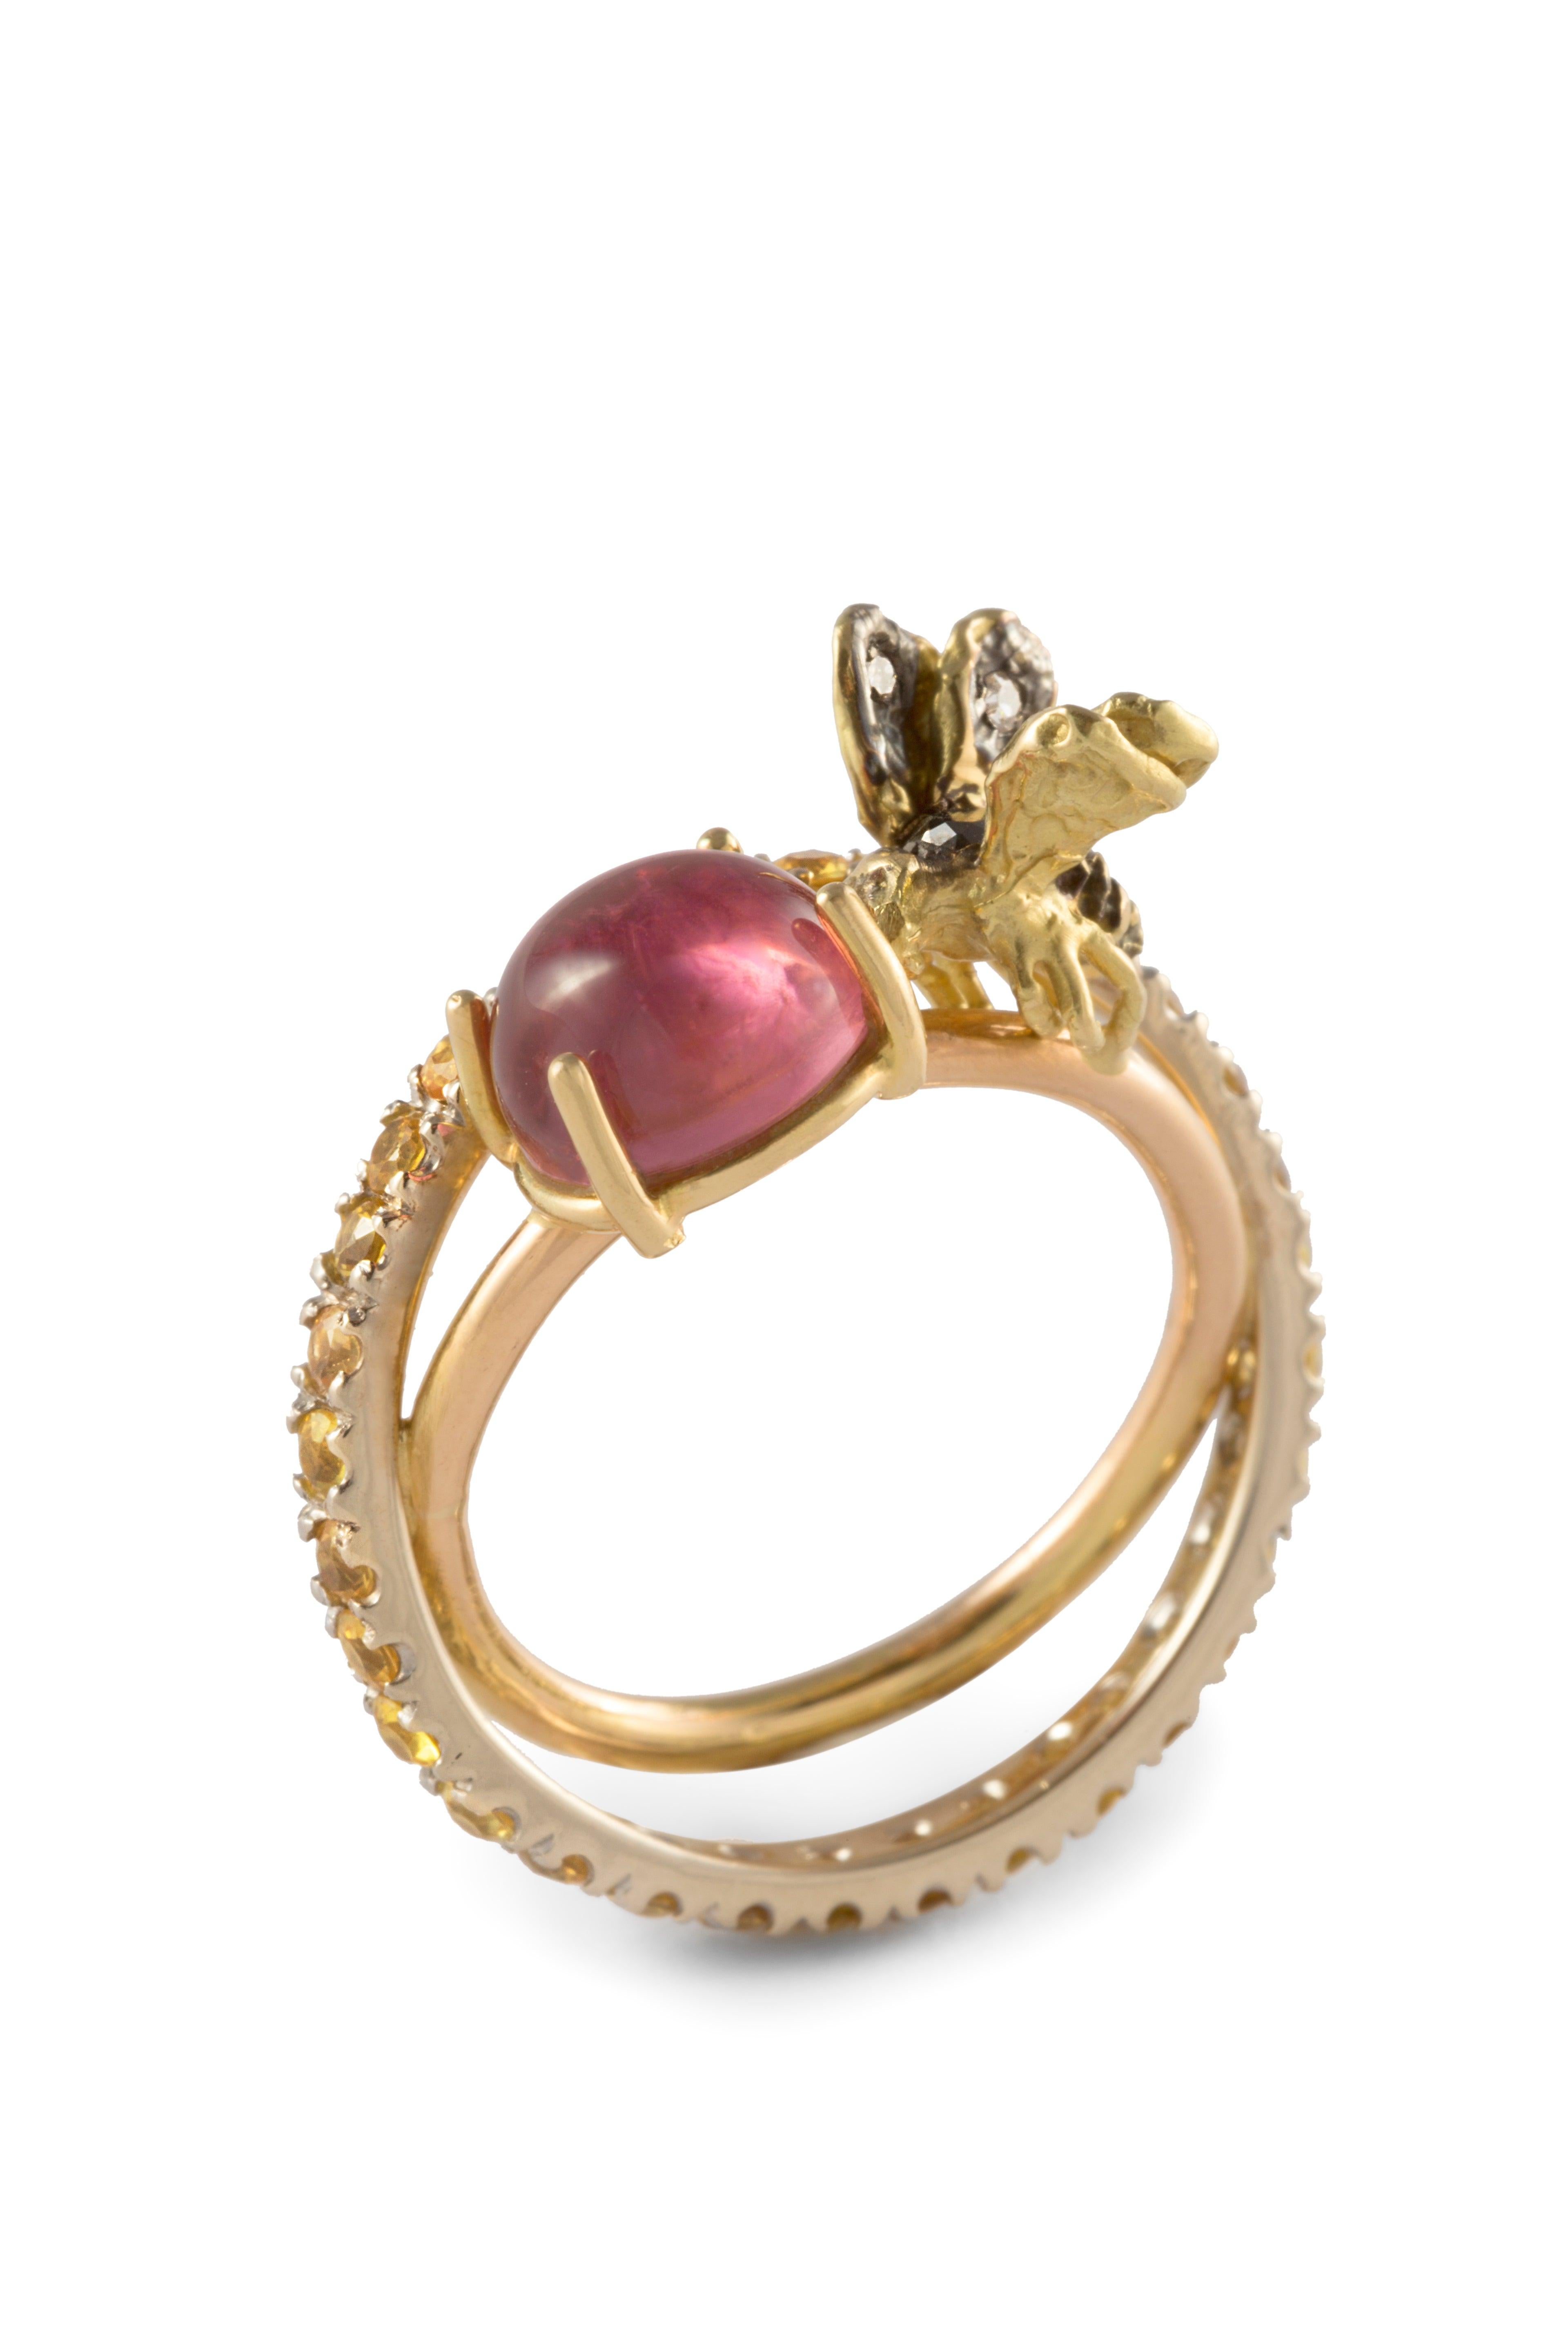 Handcrafted Rossella Ugolini Design Collection  a beautiful Modern cocktail ring handcrafted in 18 karats yellow gold with a nice flying Bee adorned with 0.08 karats White and Black Diamonds. The Bee alights lightly on one 1 Karat pink Tourmaline